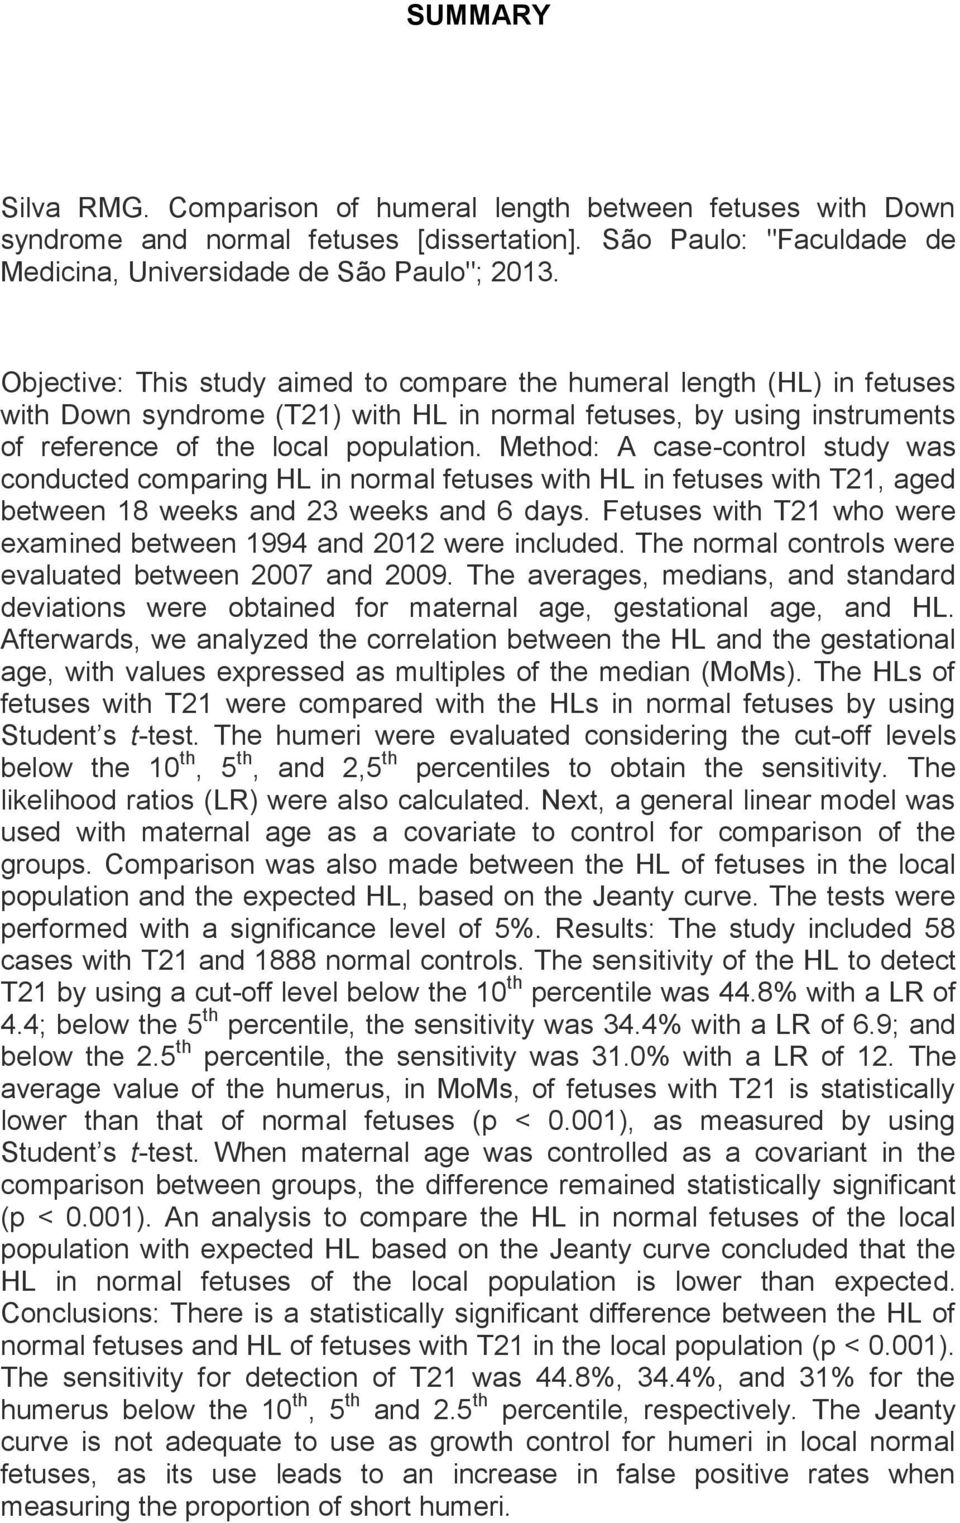 Method: A case-control study was conducted comparing HL in normal fetuses with HL in fetuses with T21, aged between 18 weeks and 23 weeks and 6 days.